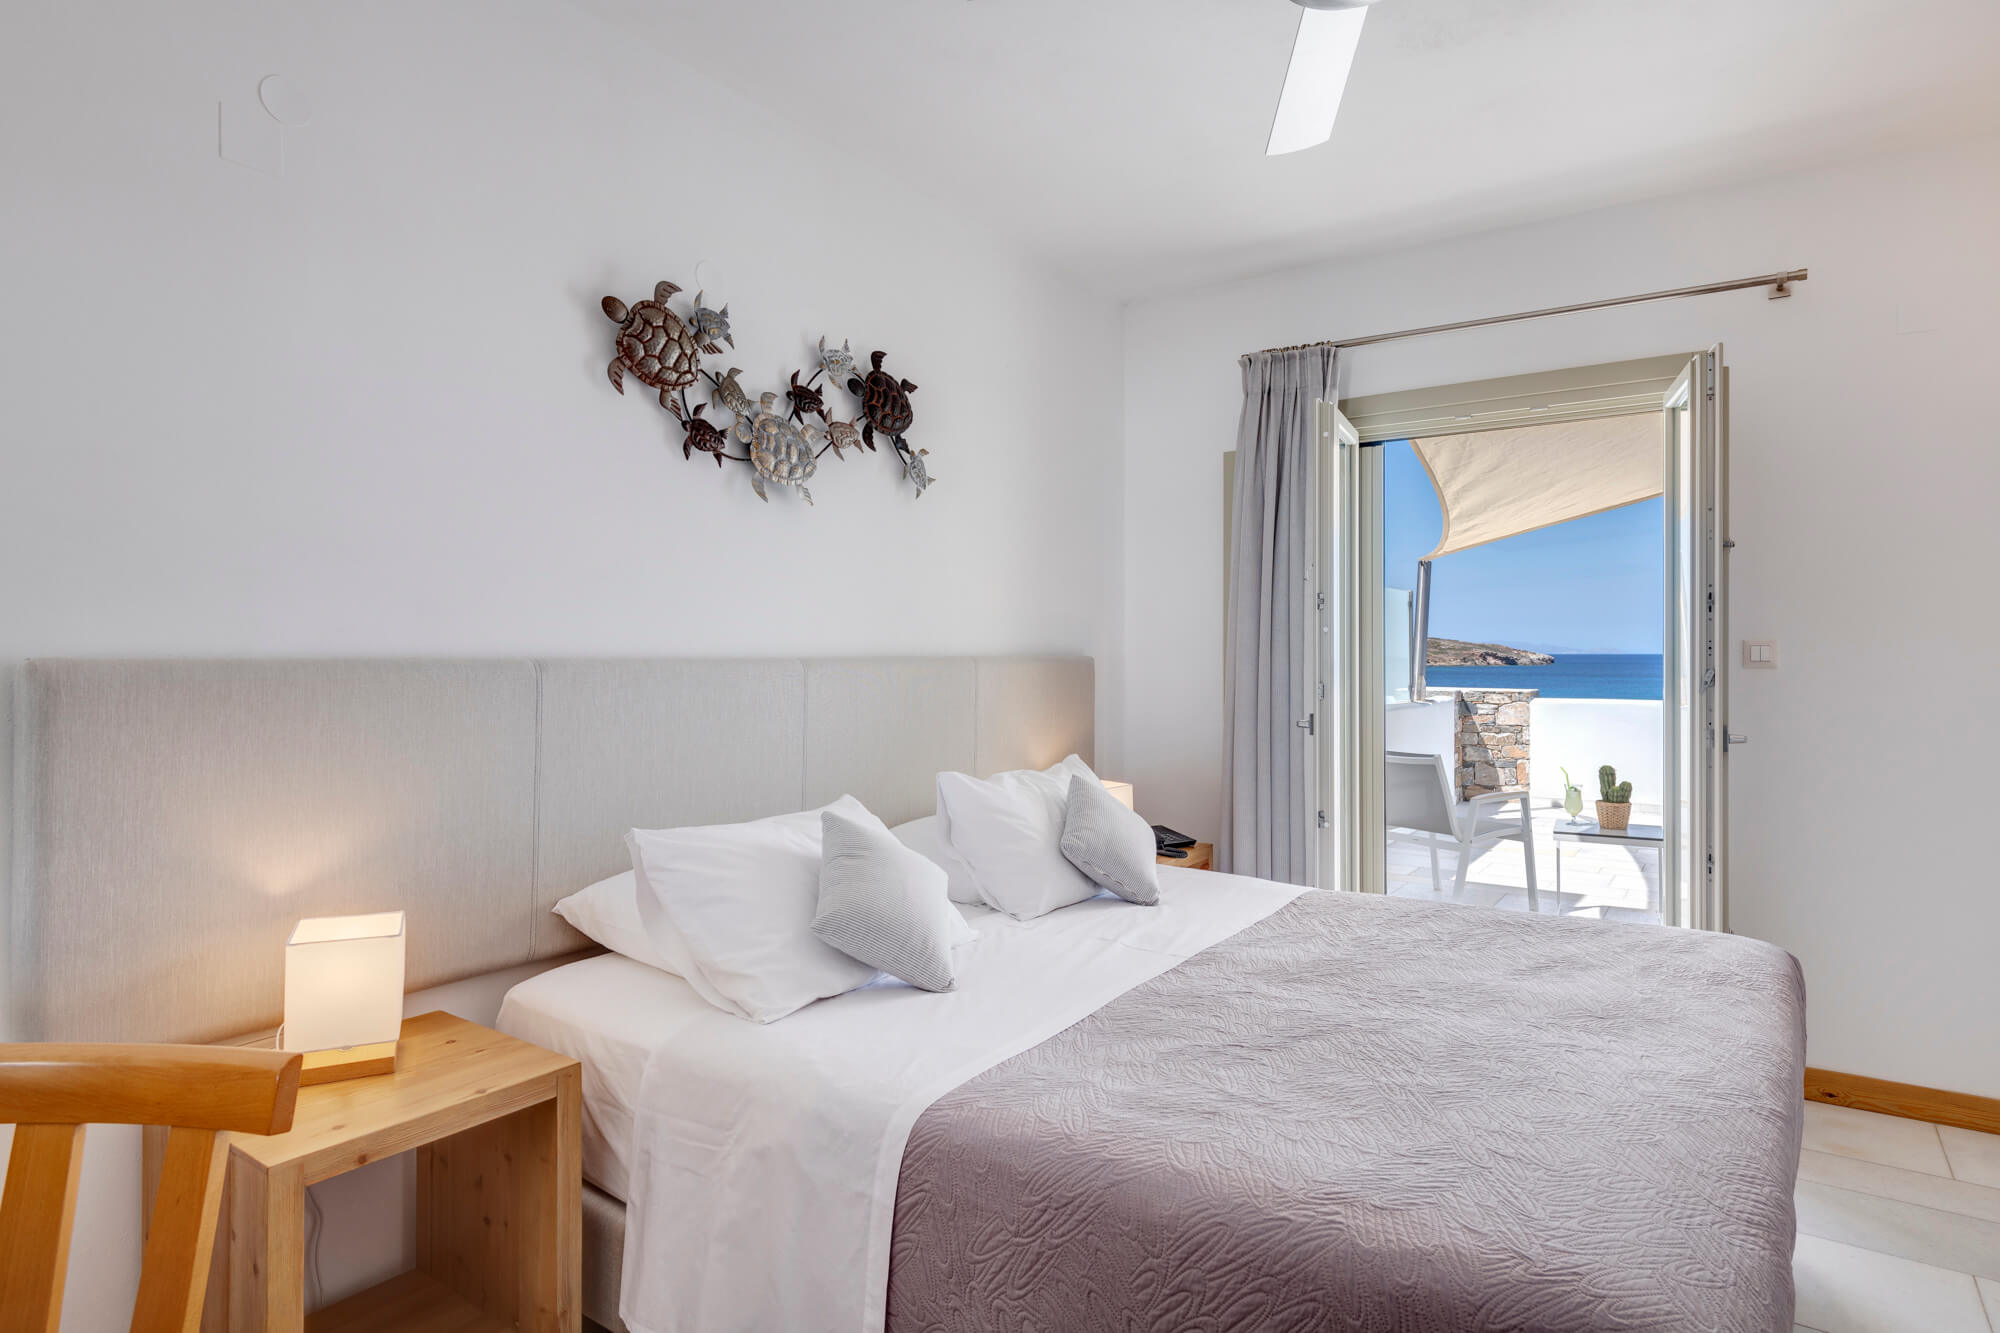 Bedroom with sea view